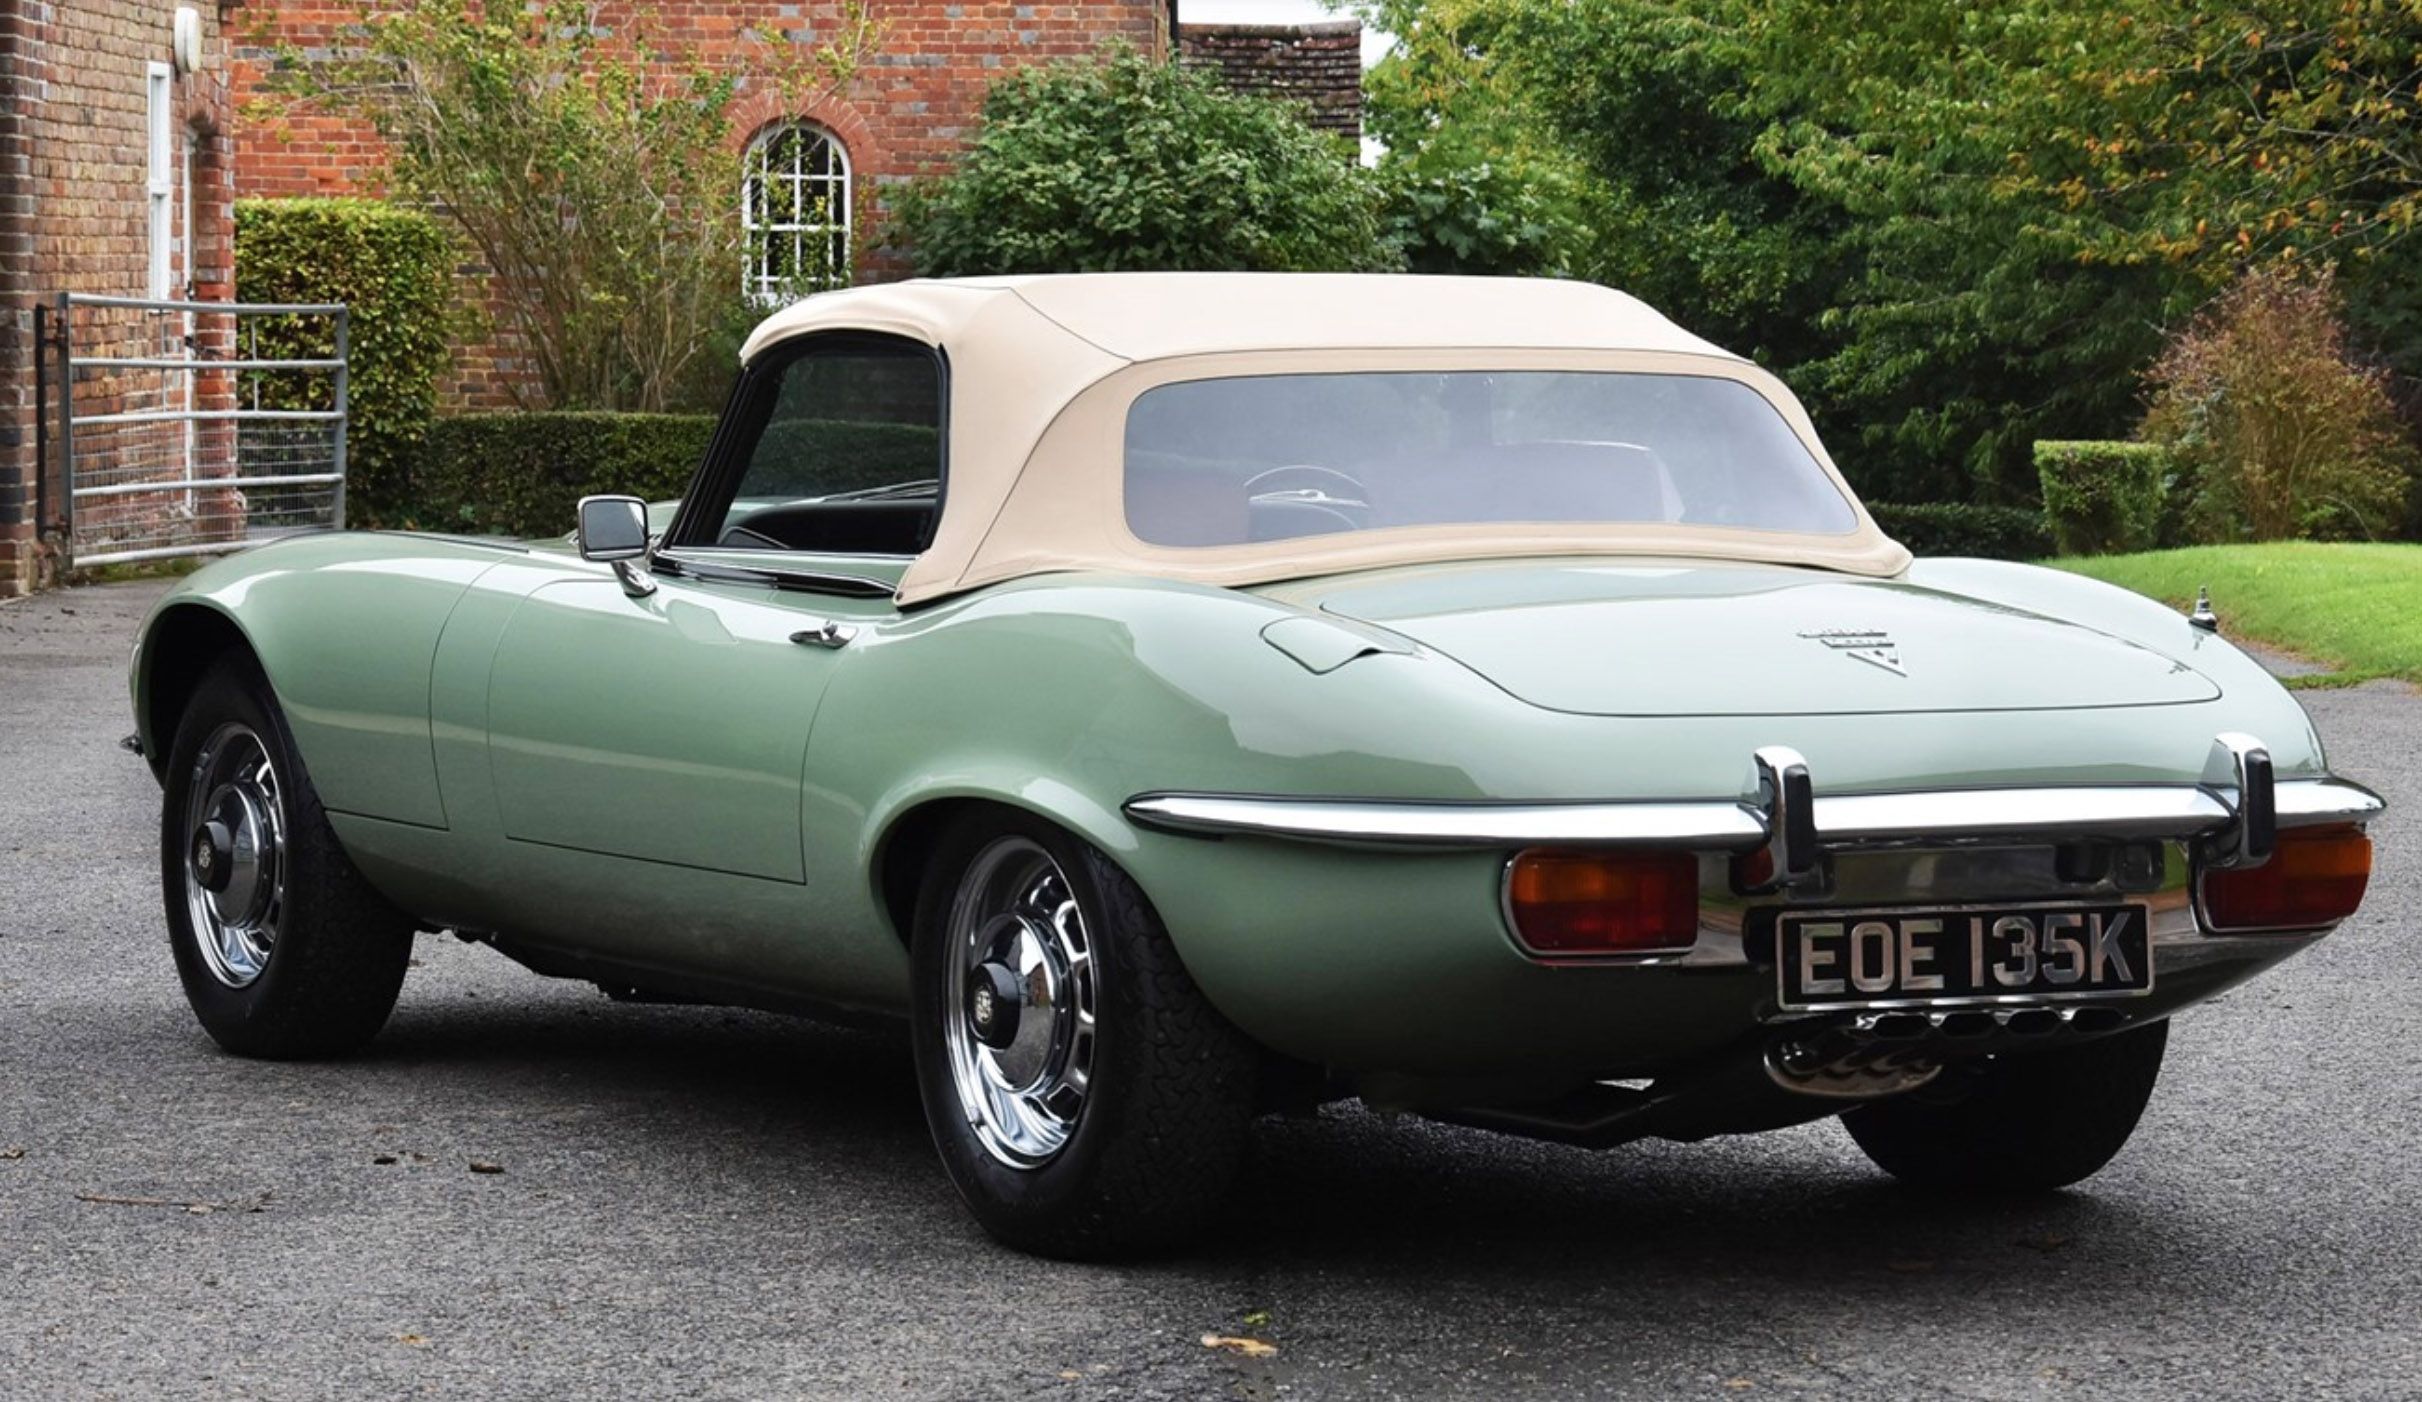 A 1972 Jaguar E-Type formerly owned by Kevin Keegan undergoes restoration - TheBritishMotorShow